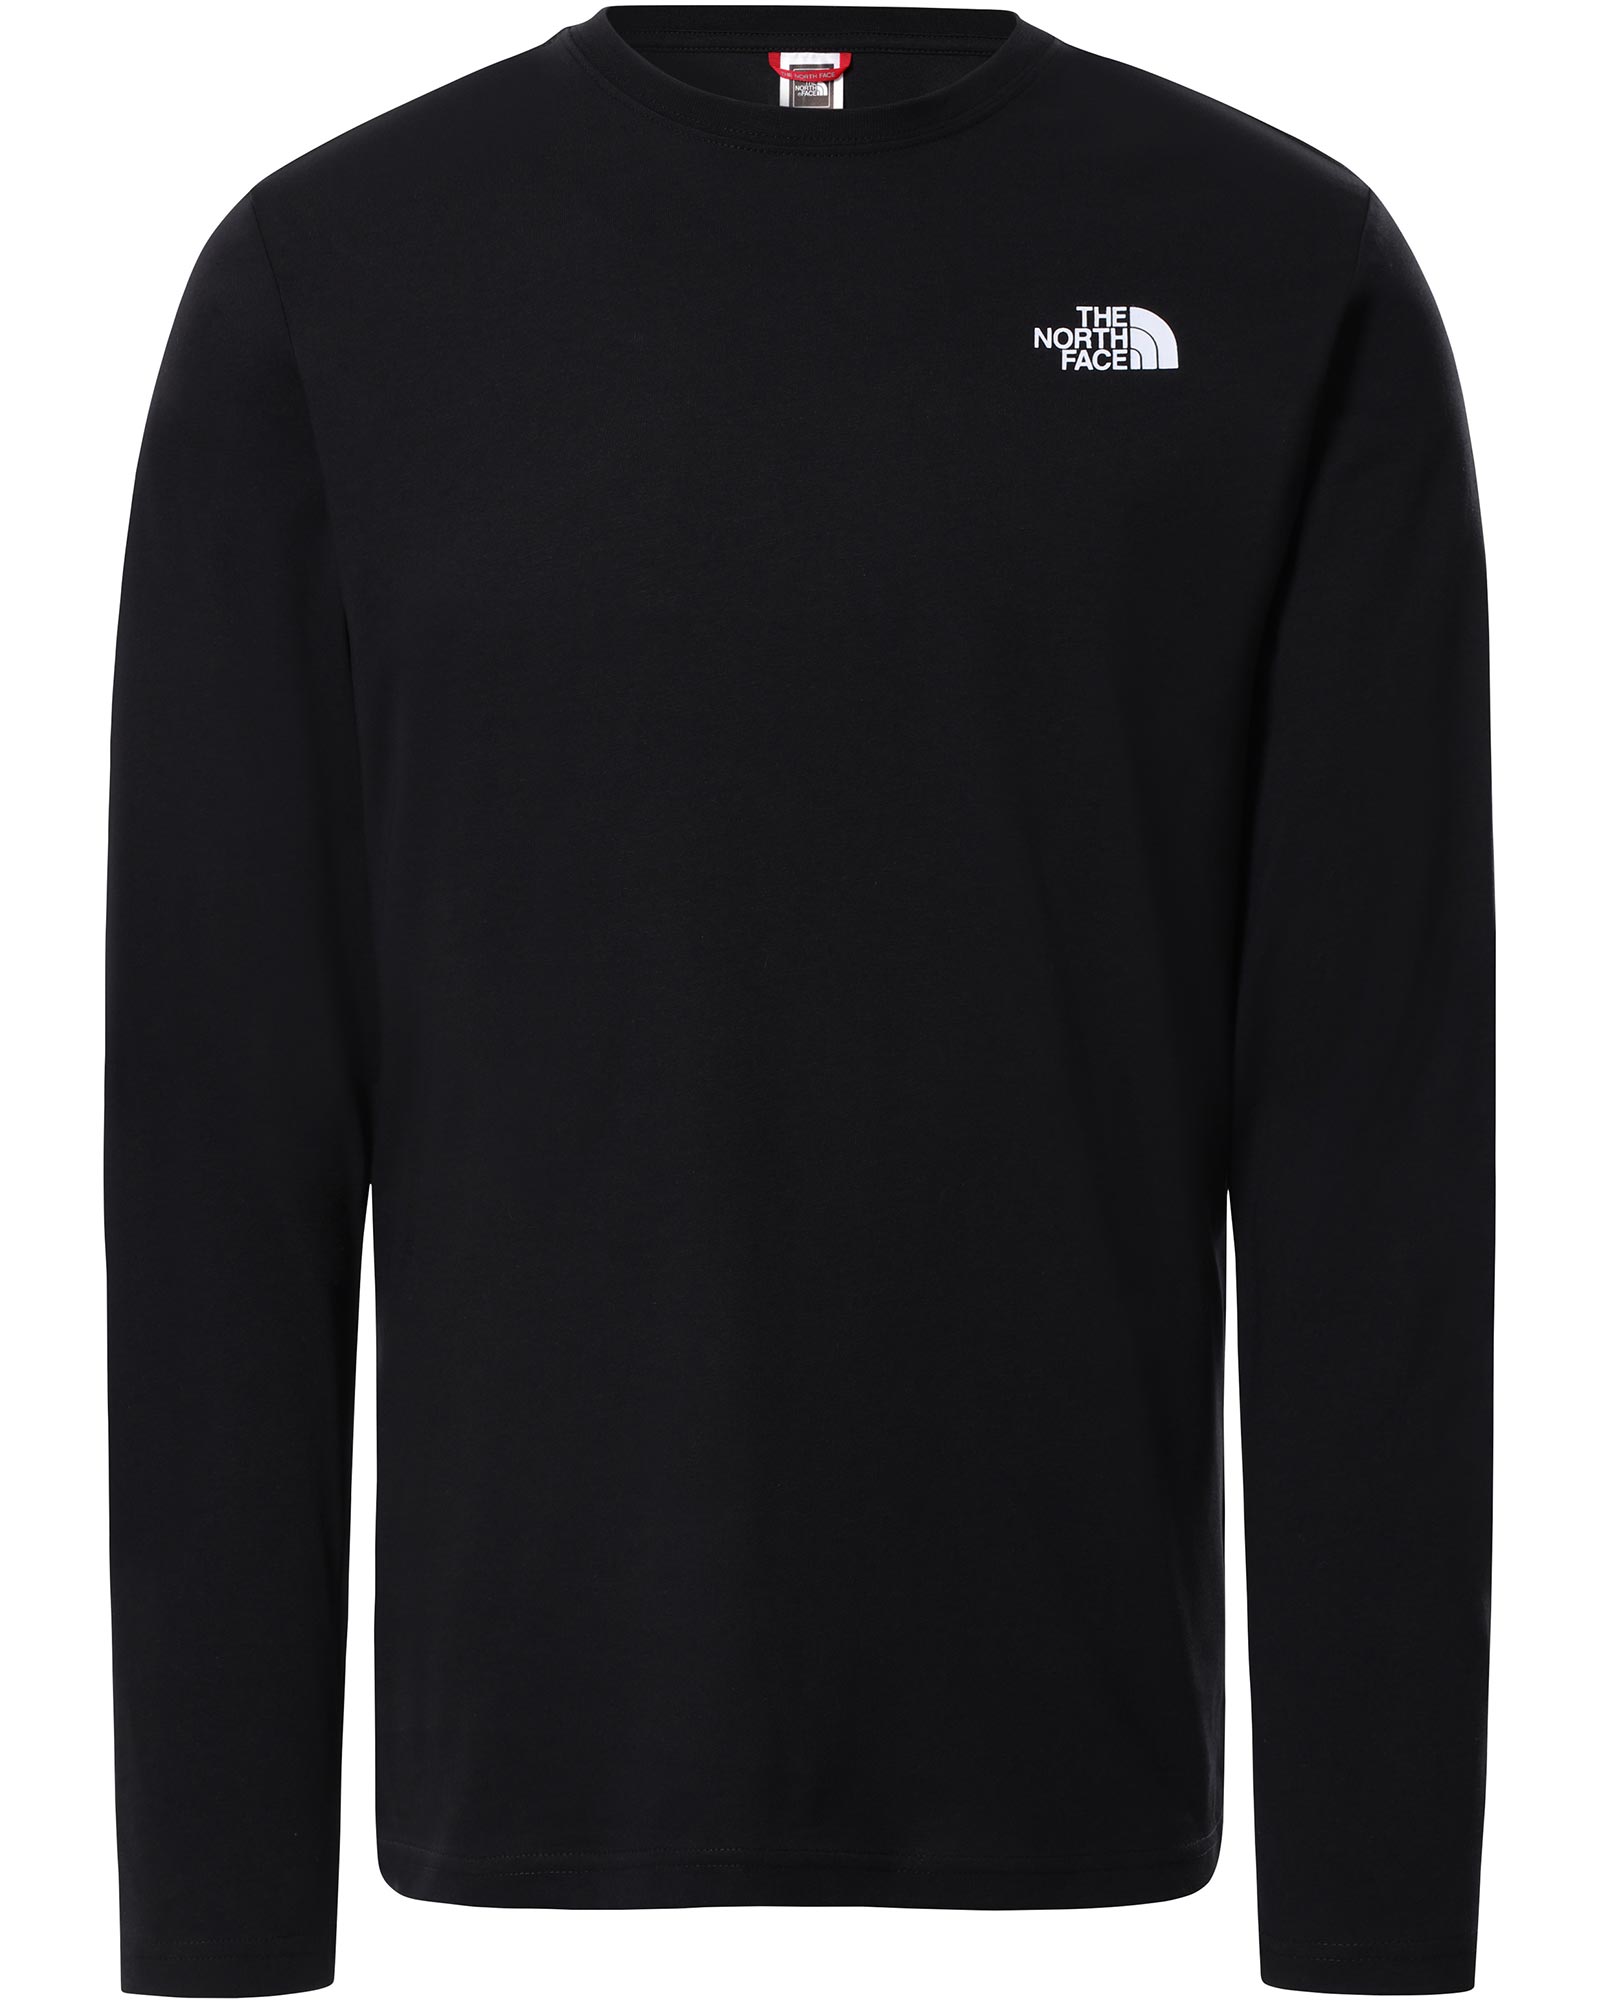 The North Face Red Box Mens Long Sleeve T-shirt